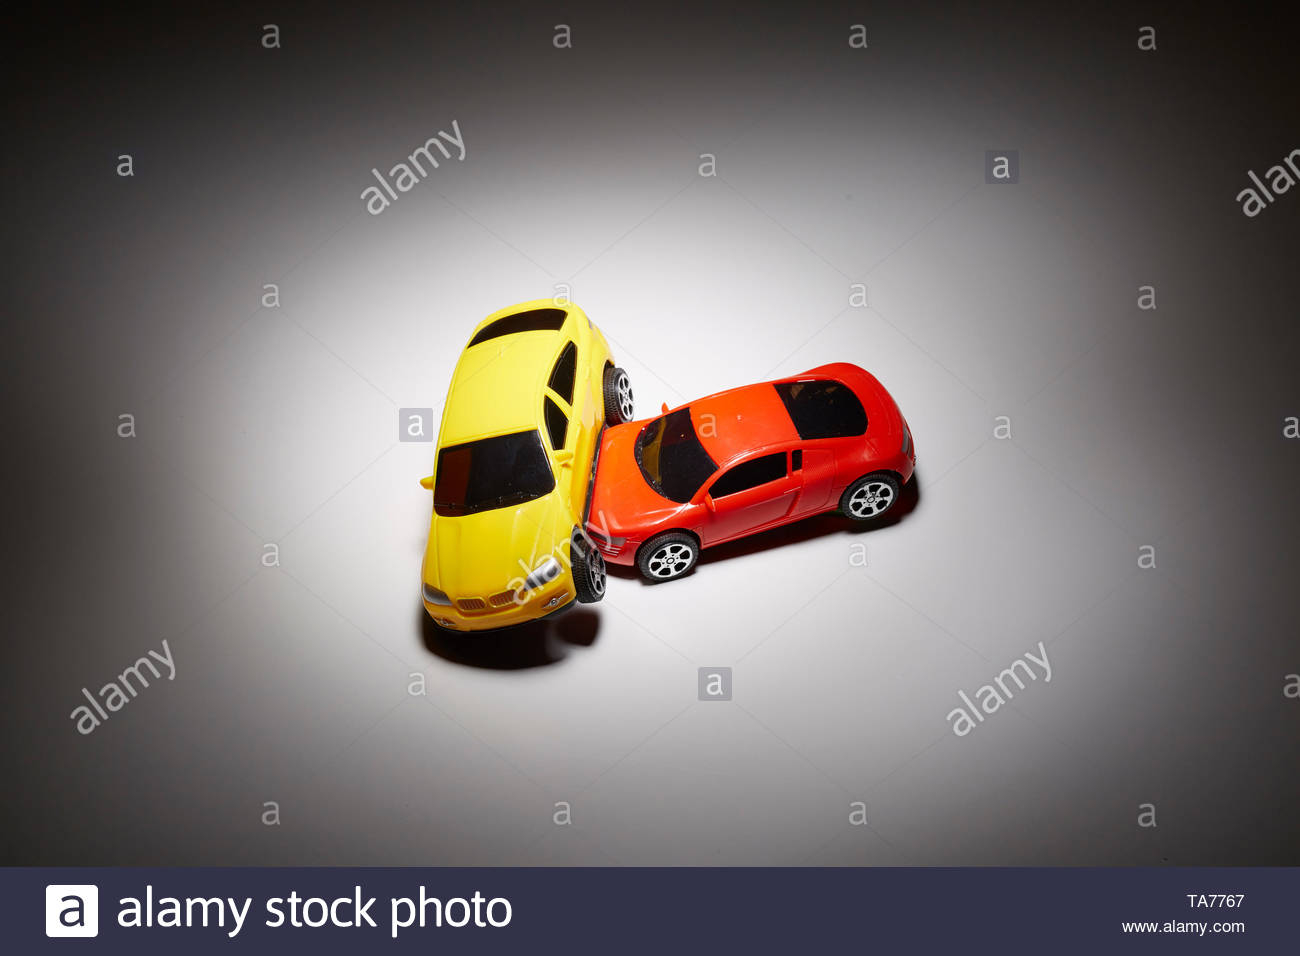 Car Insurance Stock Photo 247251039 Alamy throughout proportions 1300 X 956